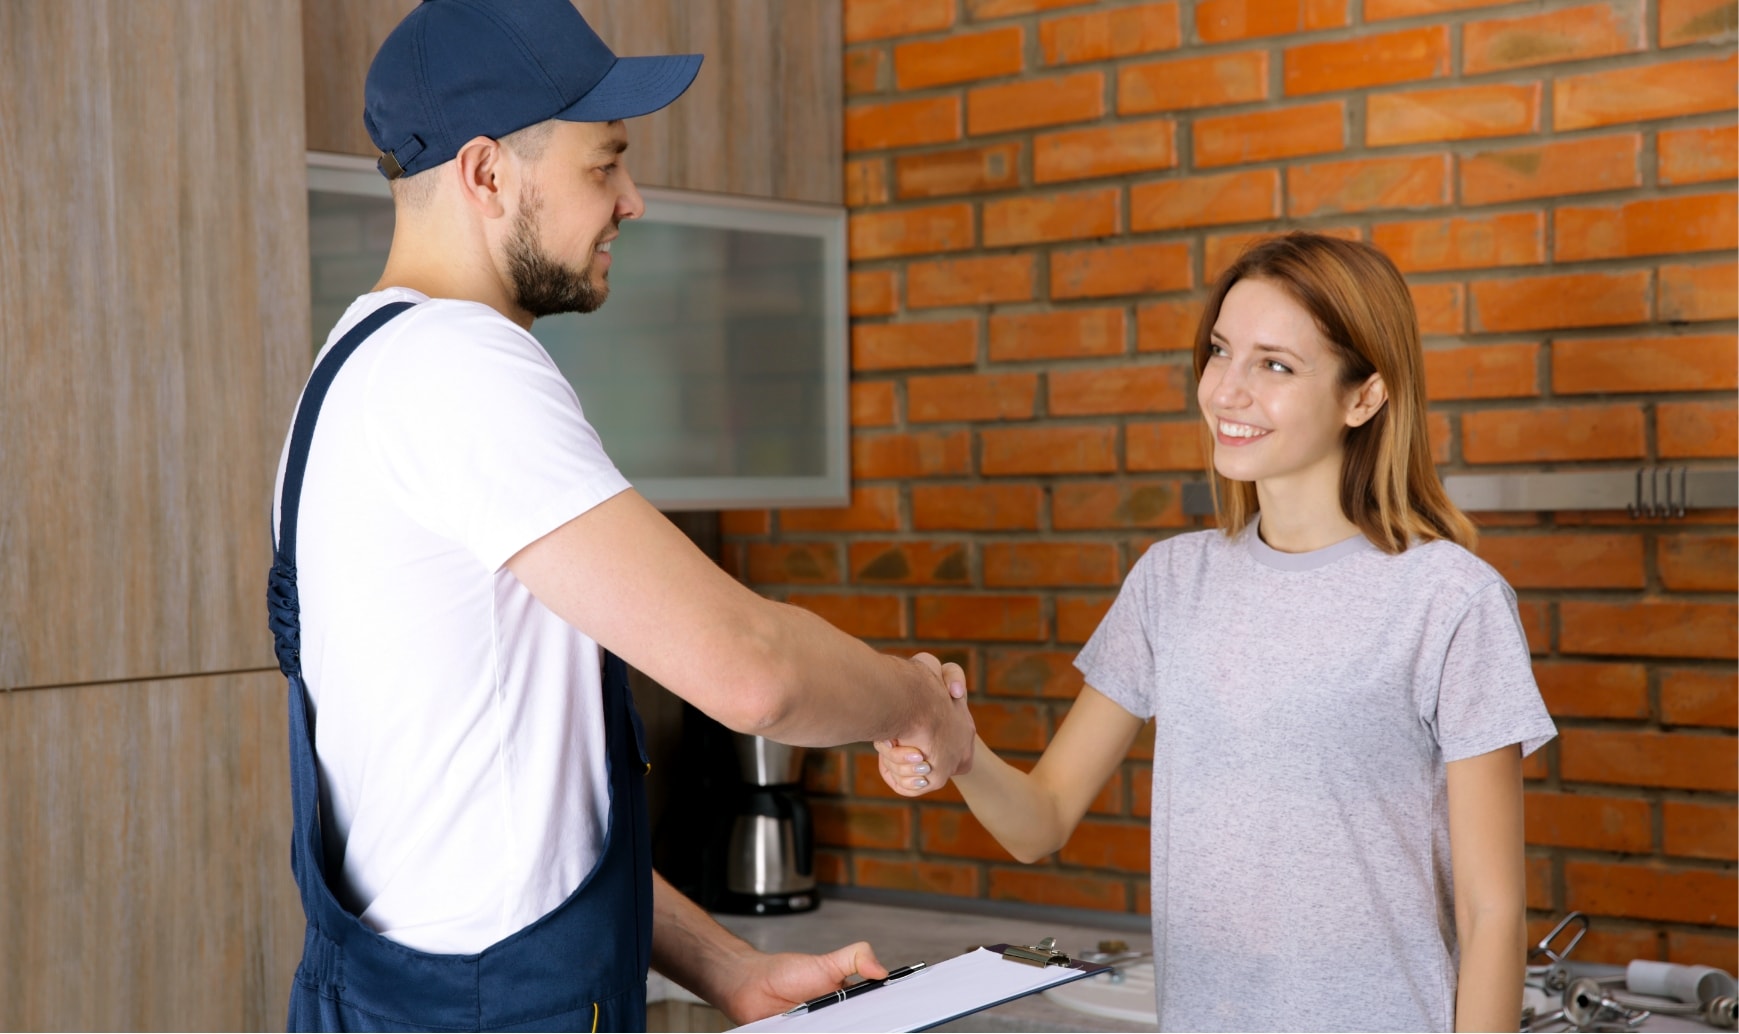 A technician shakes hands with a woman in her home.